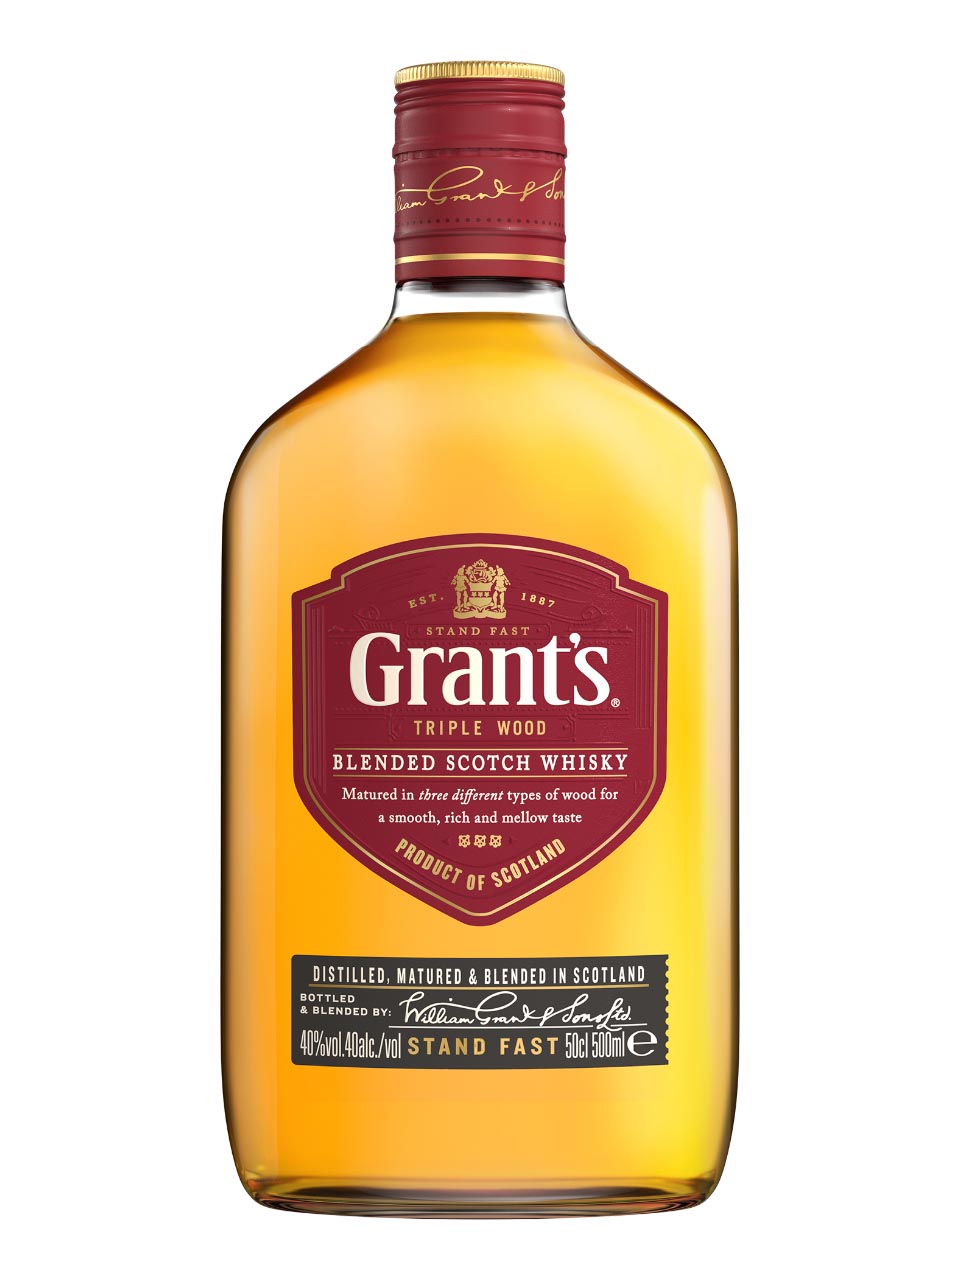 Grant's Triple Wood Blended Scotch Whisky 43% 0.5L PET null - onesize - 1